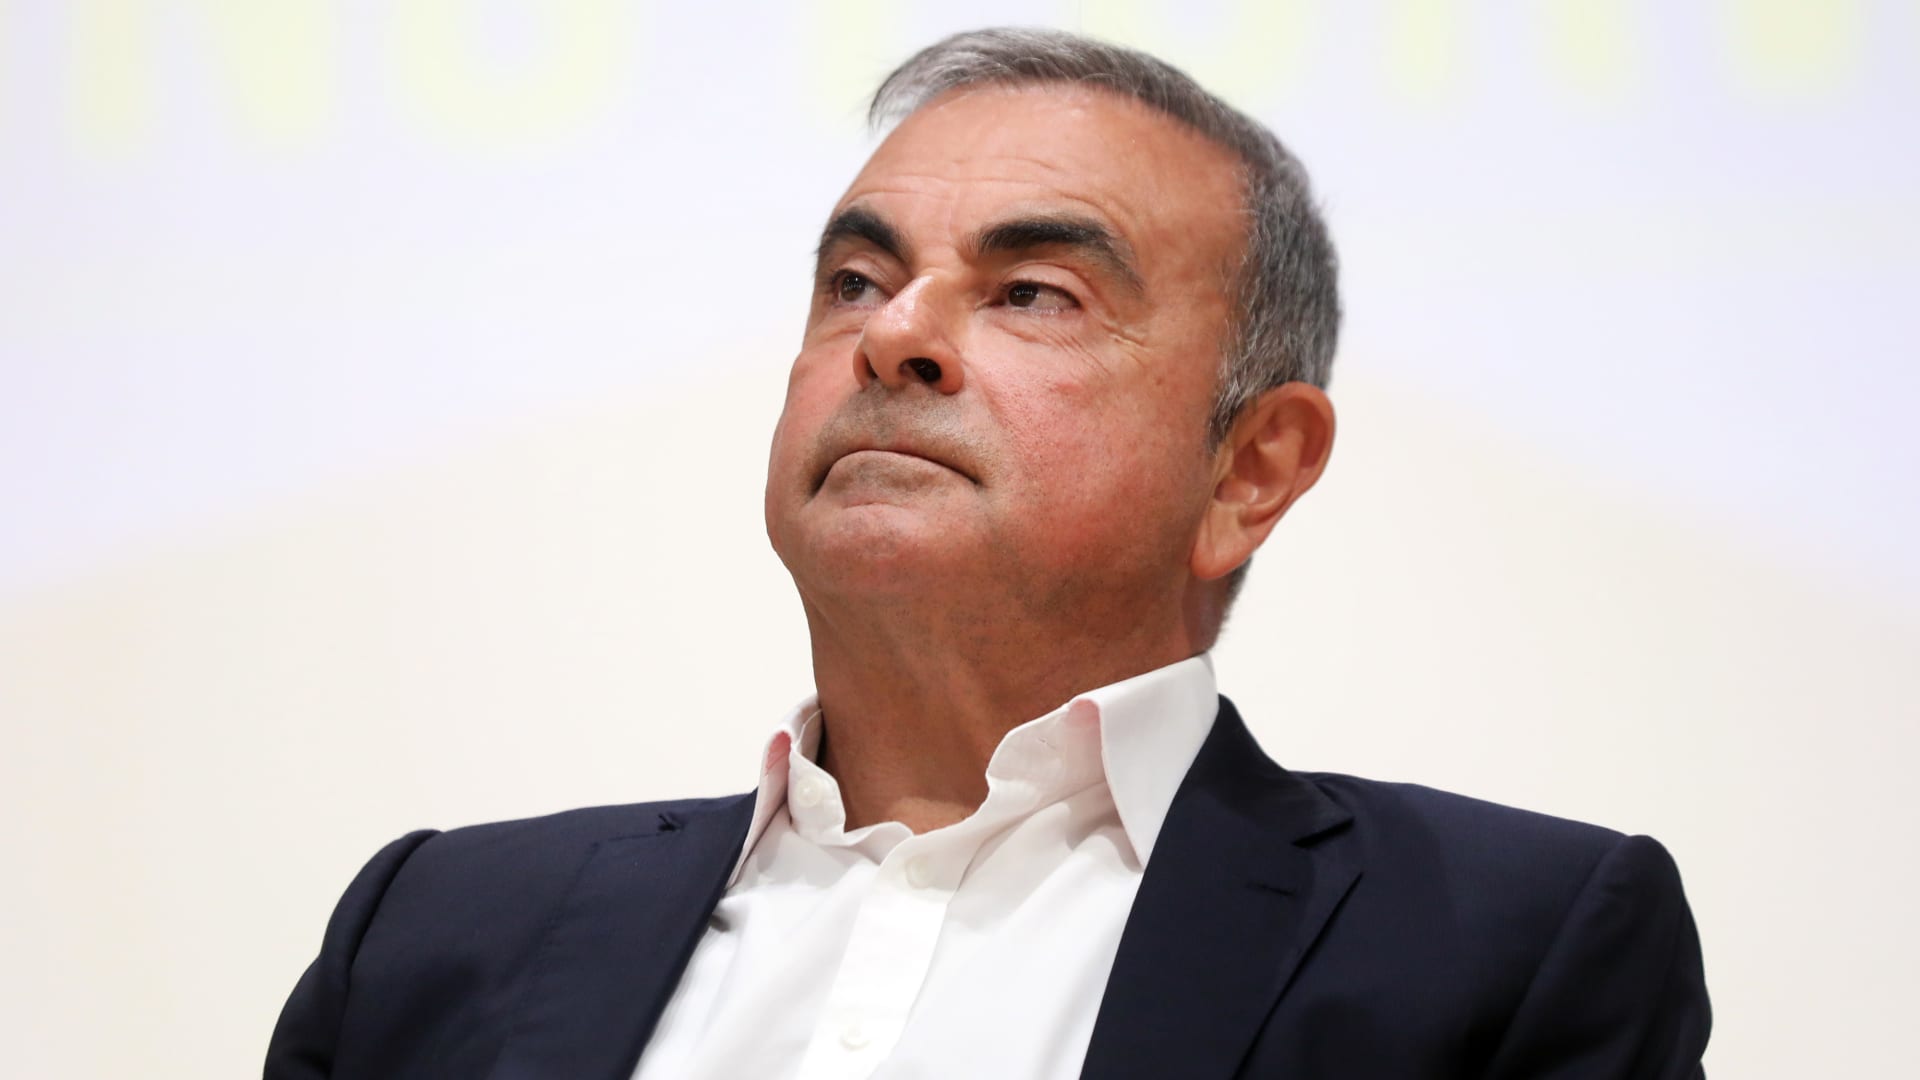 Carlos Ghosn says he expects fair trial in France following arrest warrant